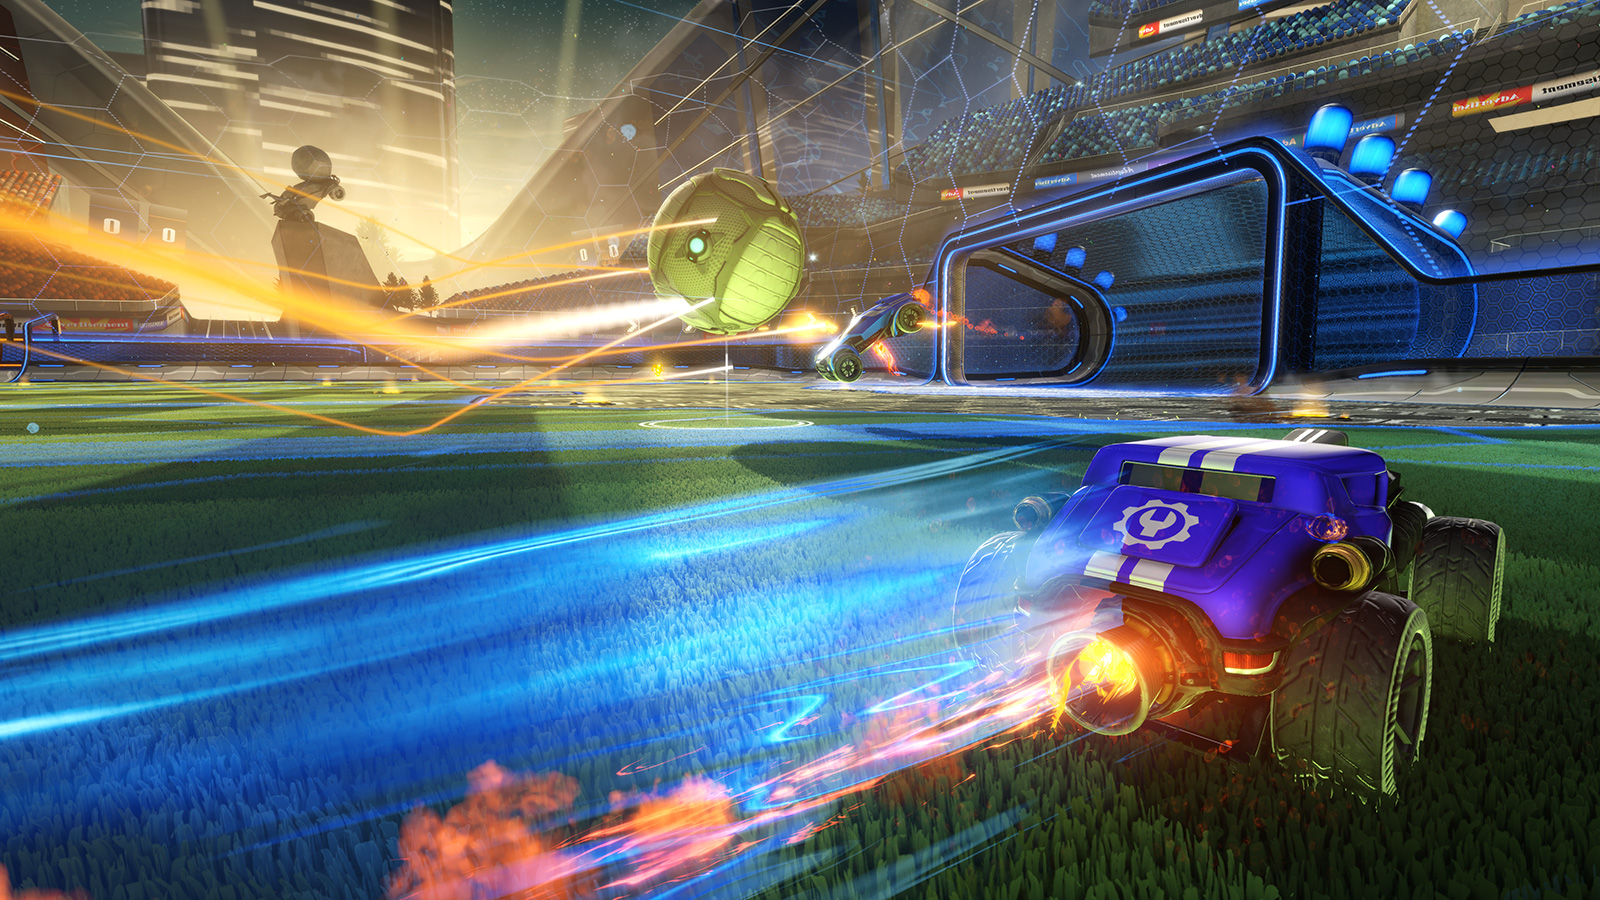 Esports Weekly Rocket League Blasting off to Twitch! — Esports Consulting